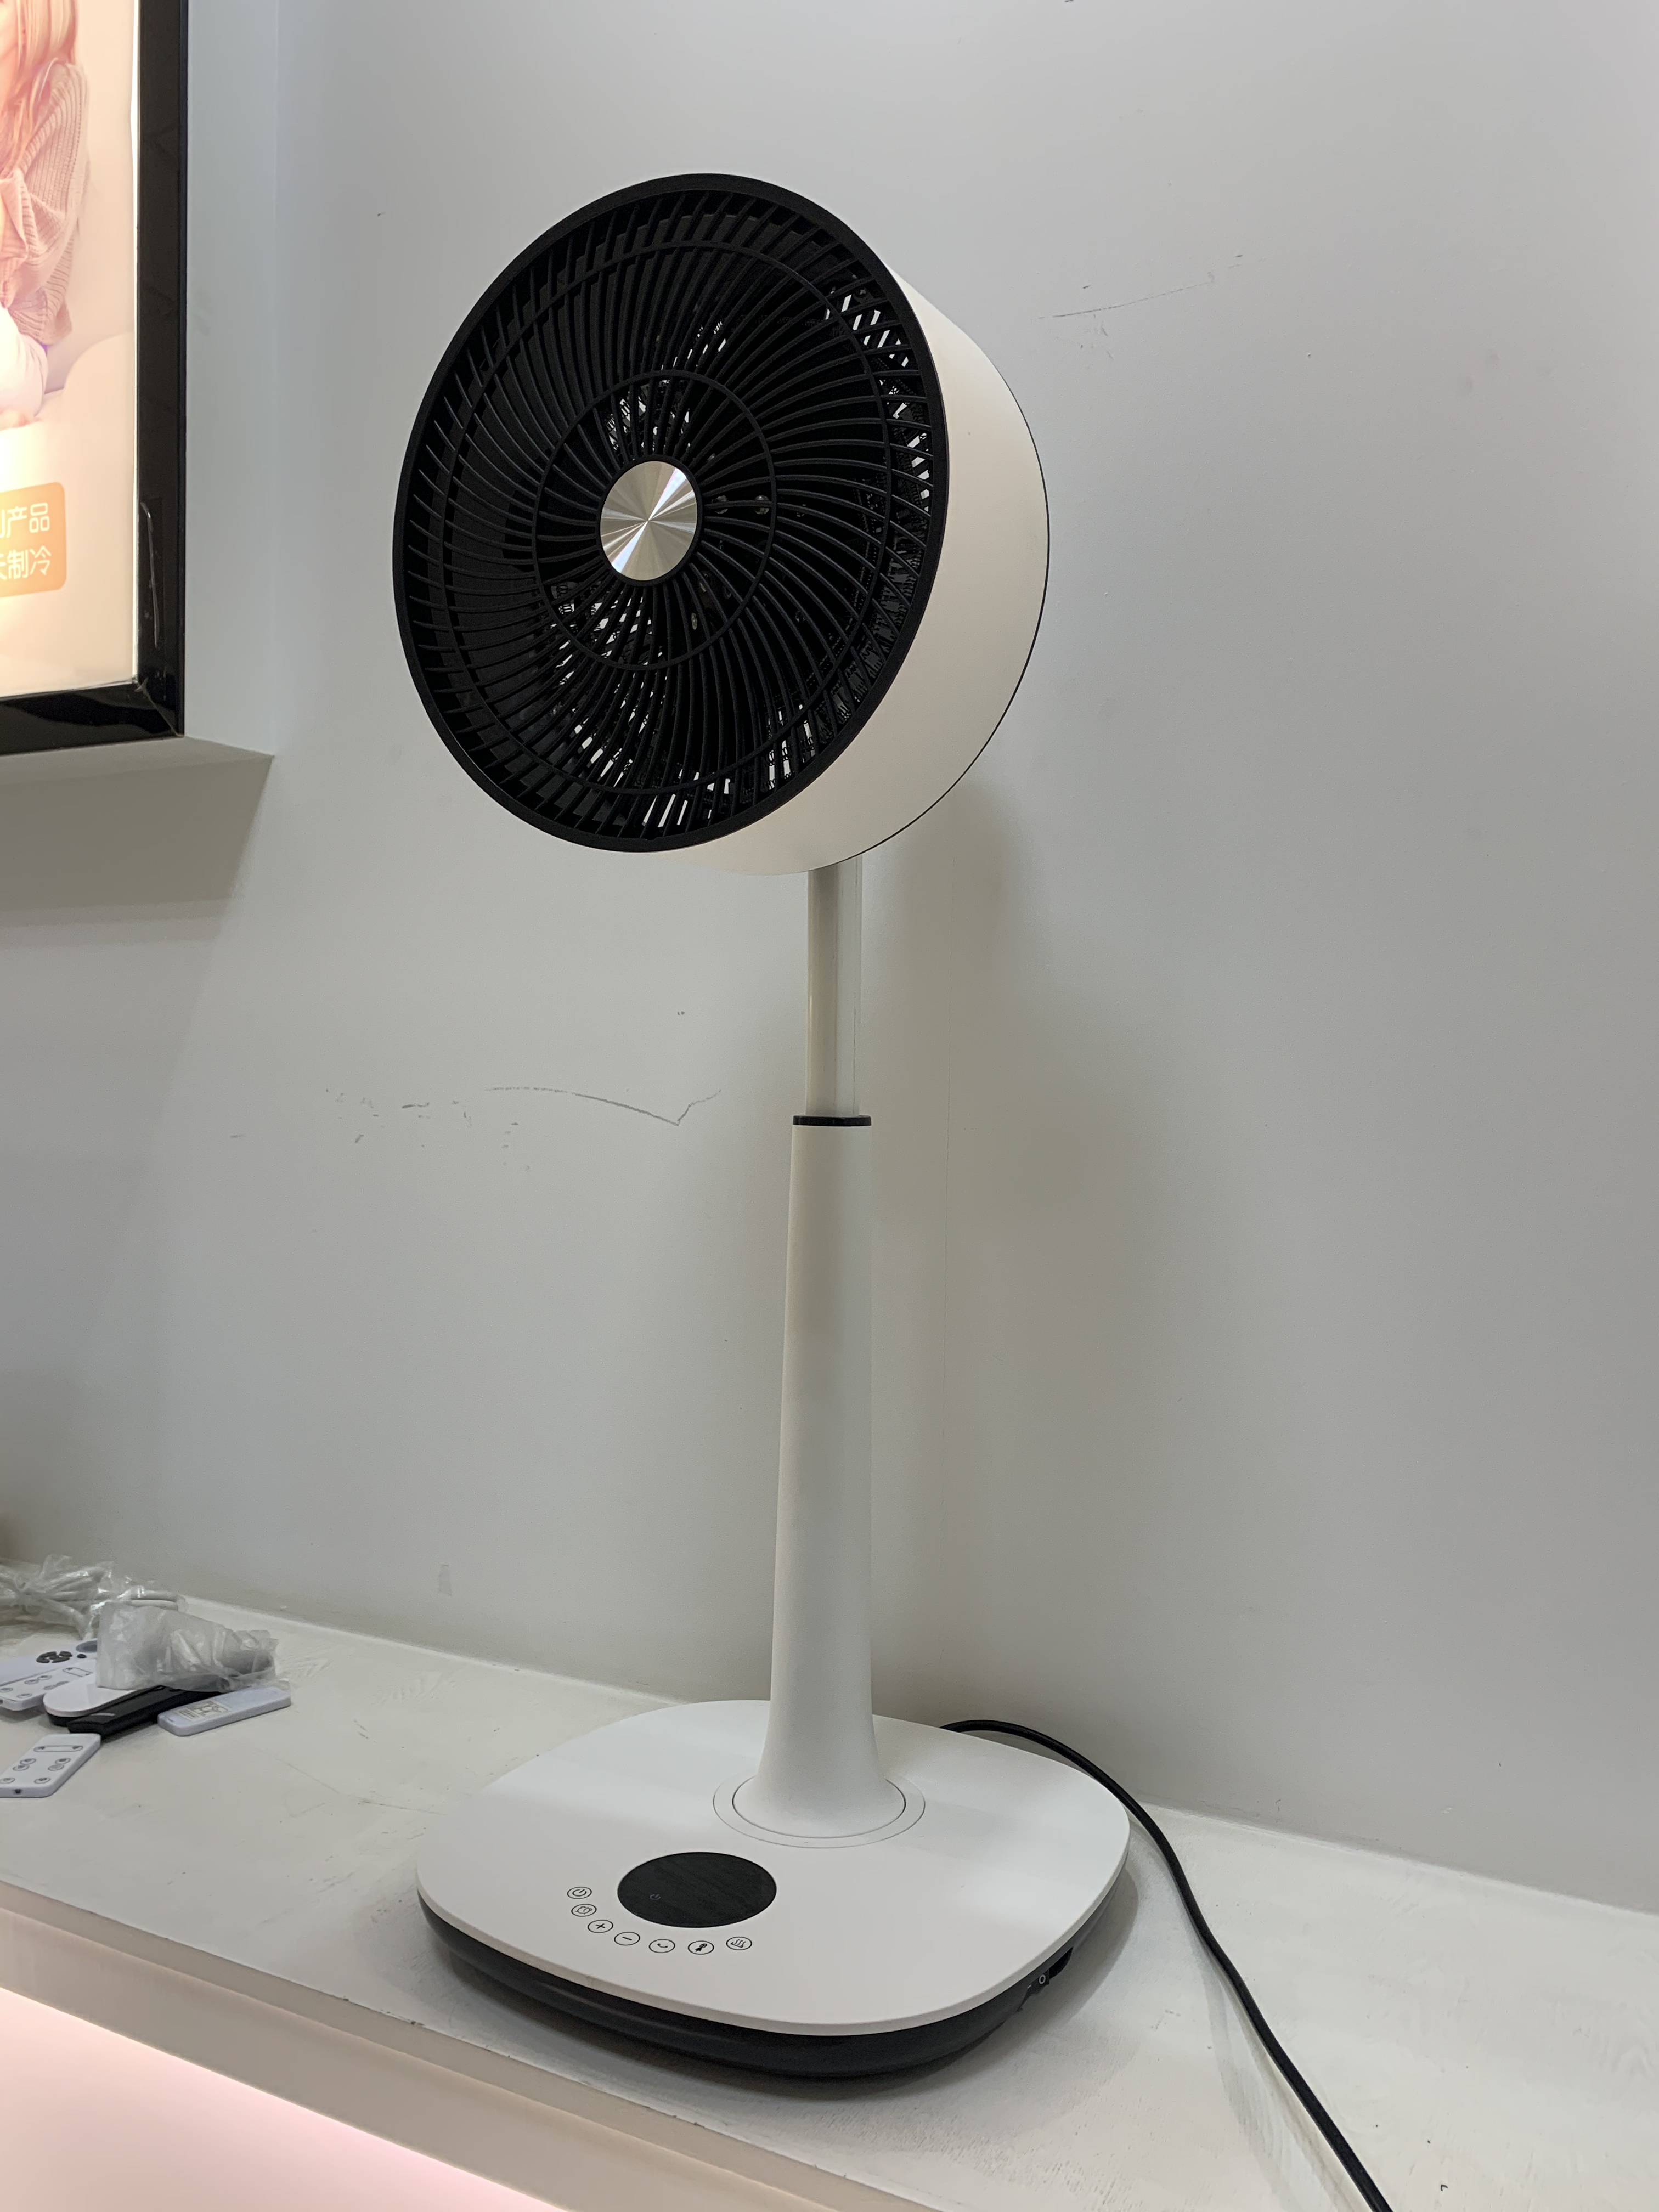 Heating and cooling fan